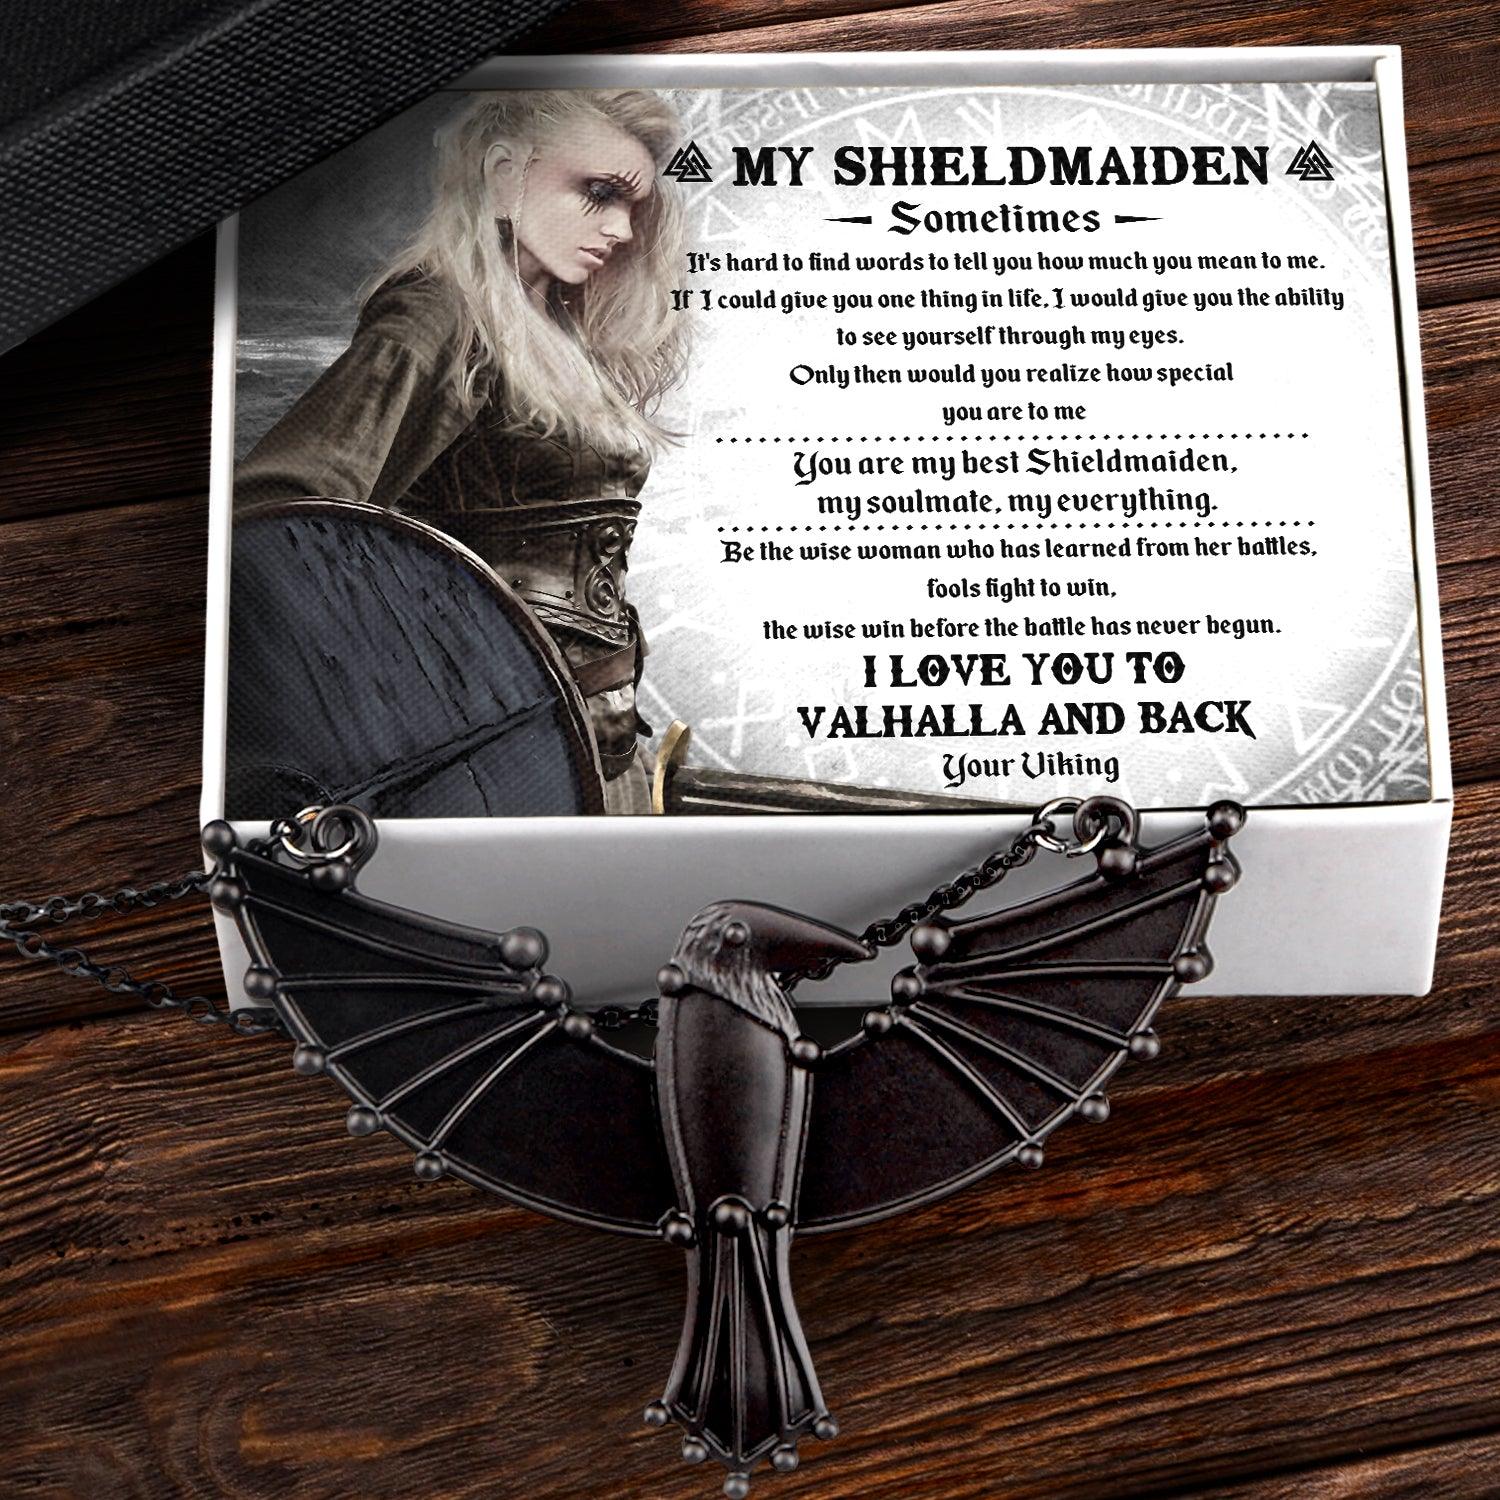 dark raven necklace viking my shield maiden i love you to valhalla and back augncm13002 gifts holder 1